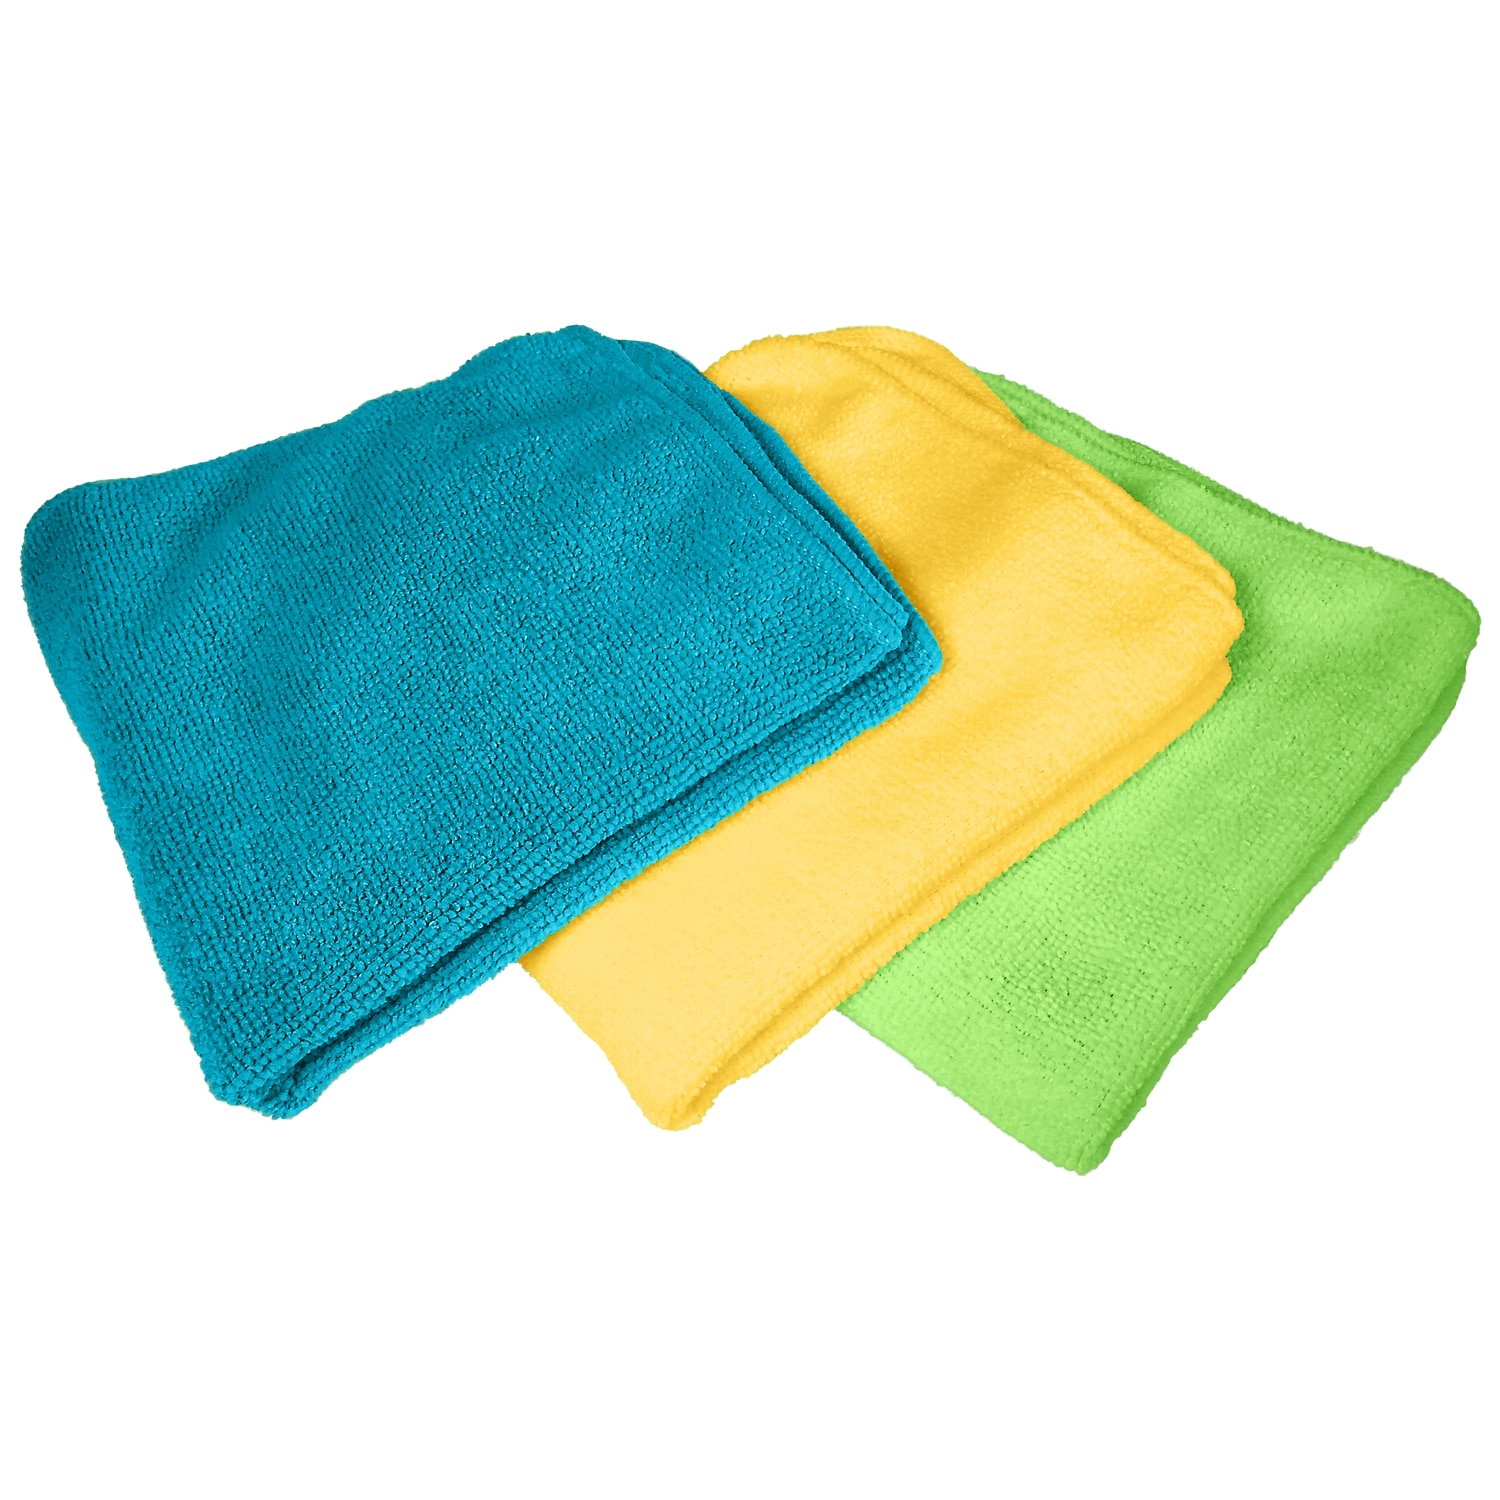 E-cloth Stainless Steel Microfiber Cleaning Cloth Set - 2ct : Target